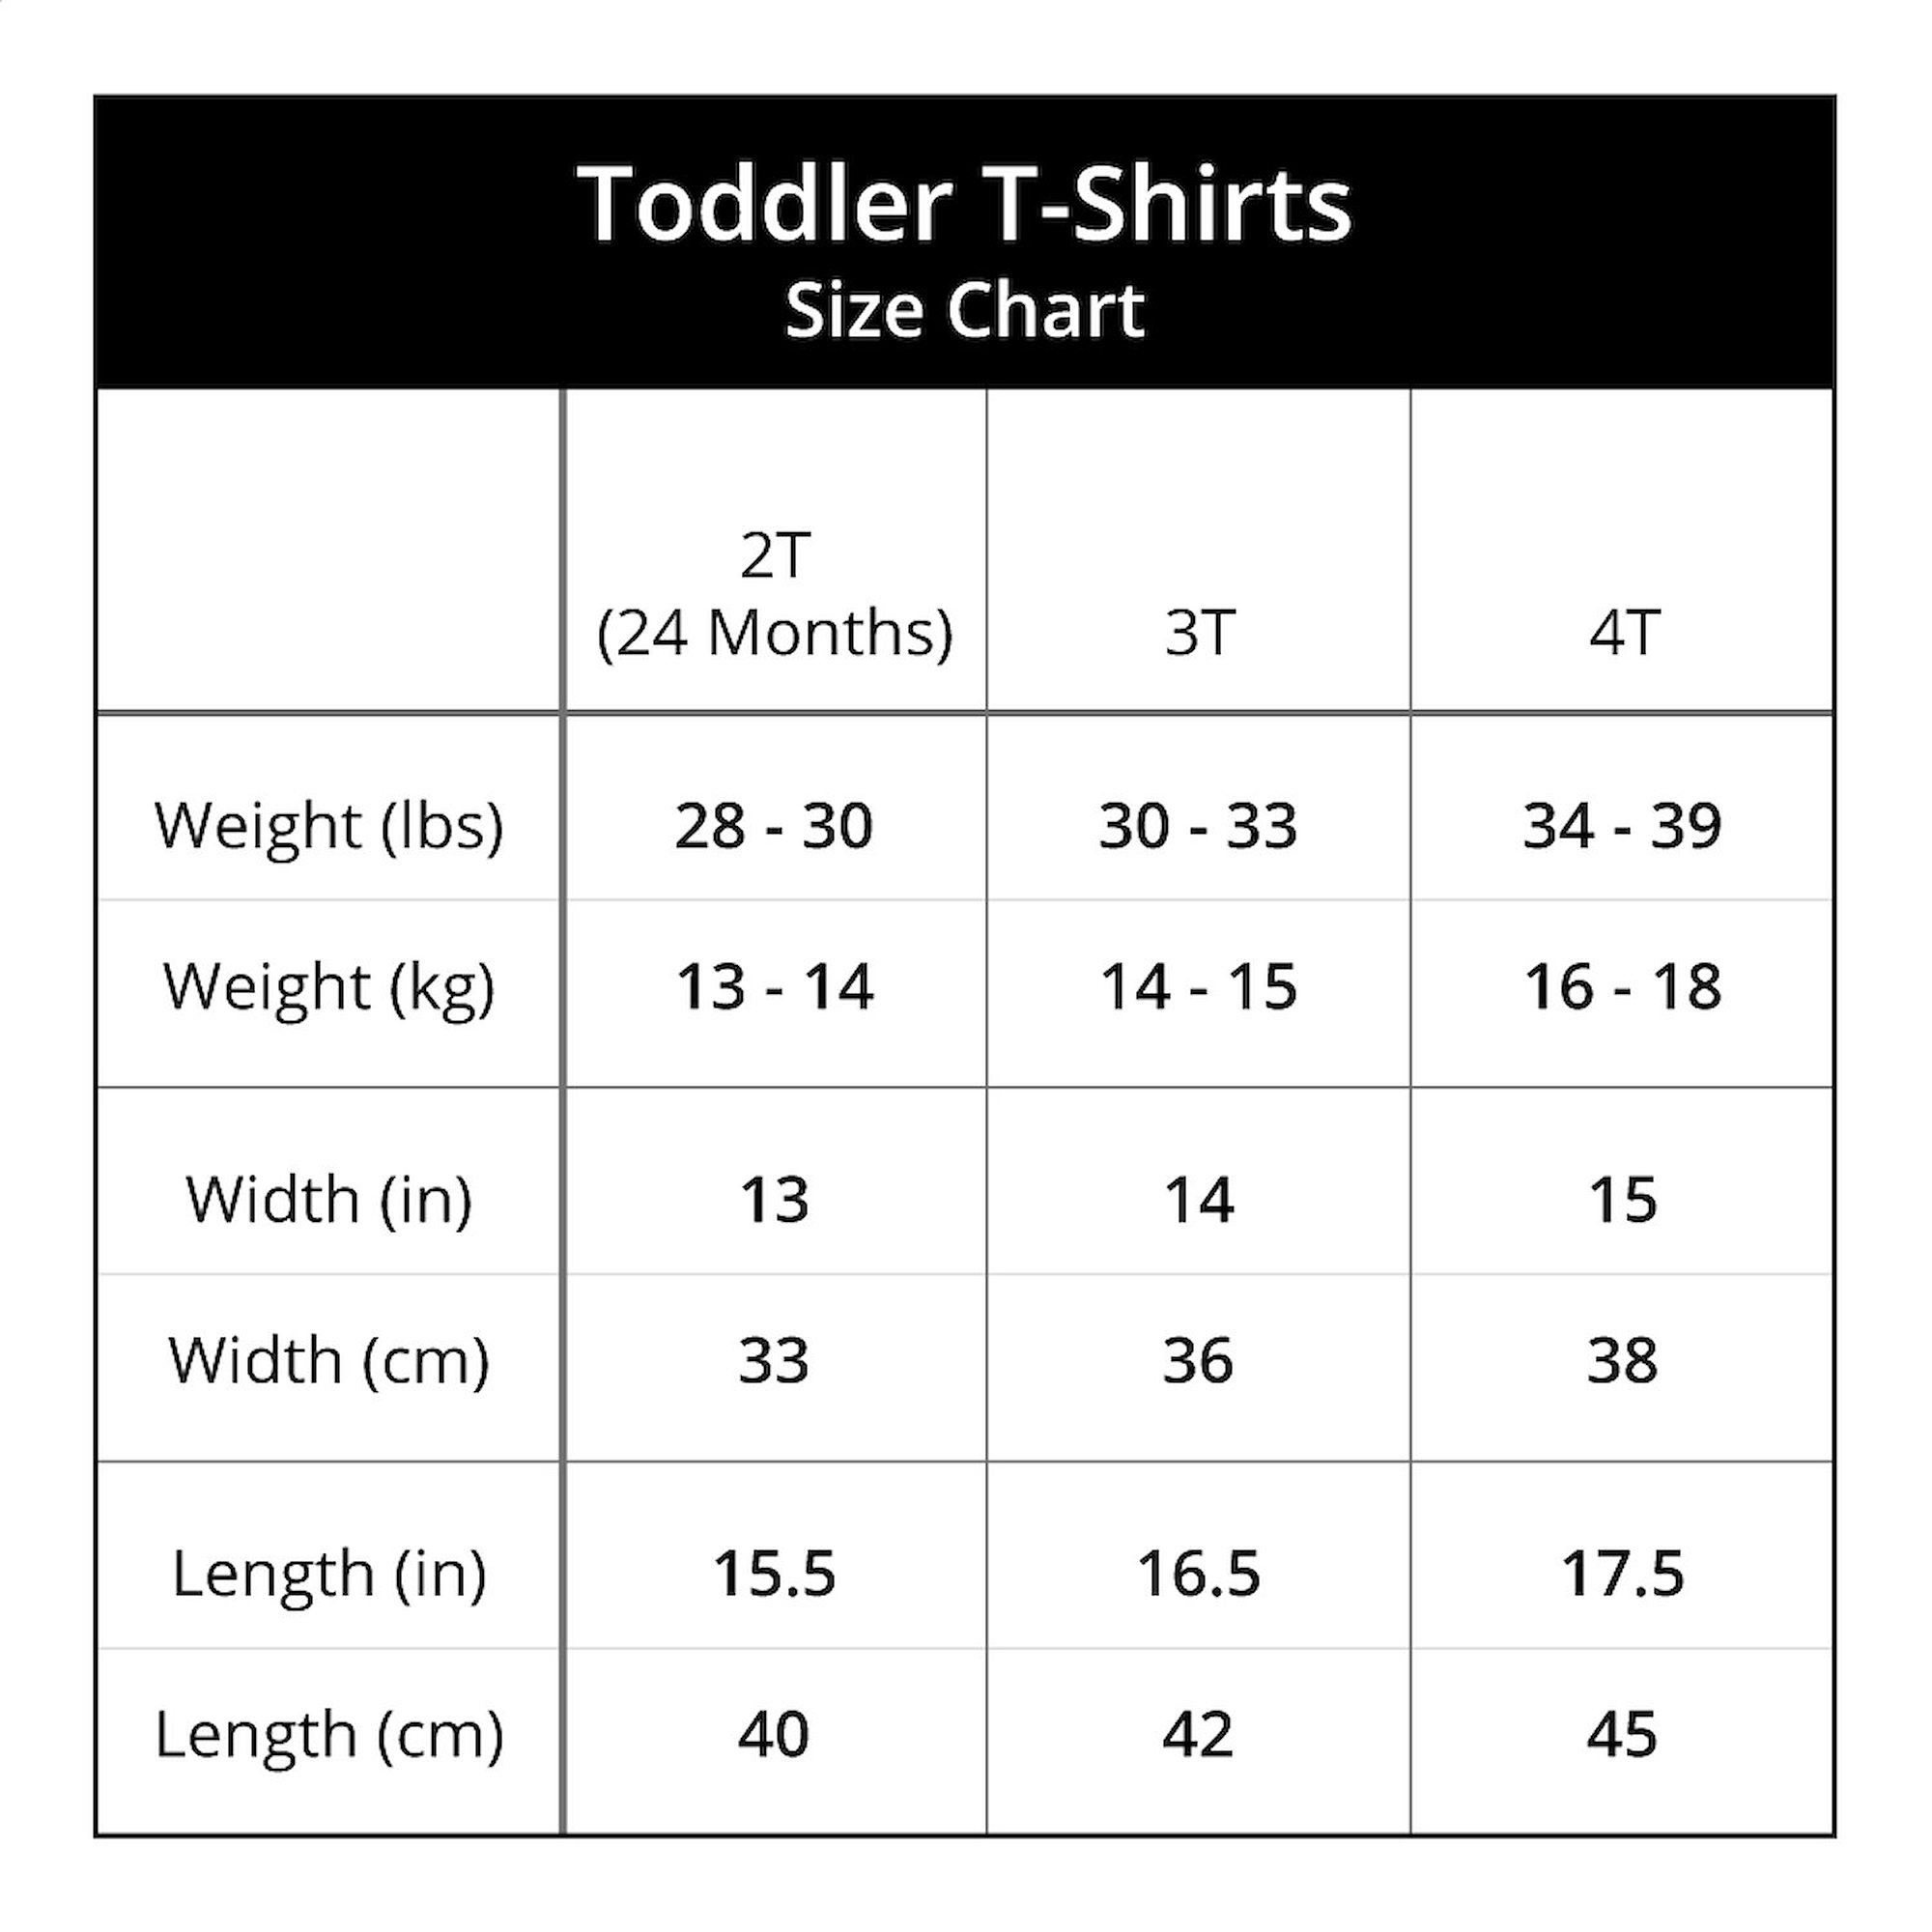 CafePress - I'm Two Much 2Nd Birthday Toddler T Shirt - Cute Toddler T-Shirt, 100% Cotton - image 4 of 4